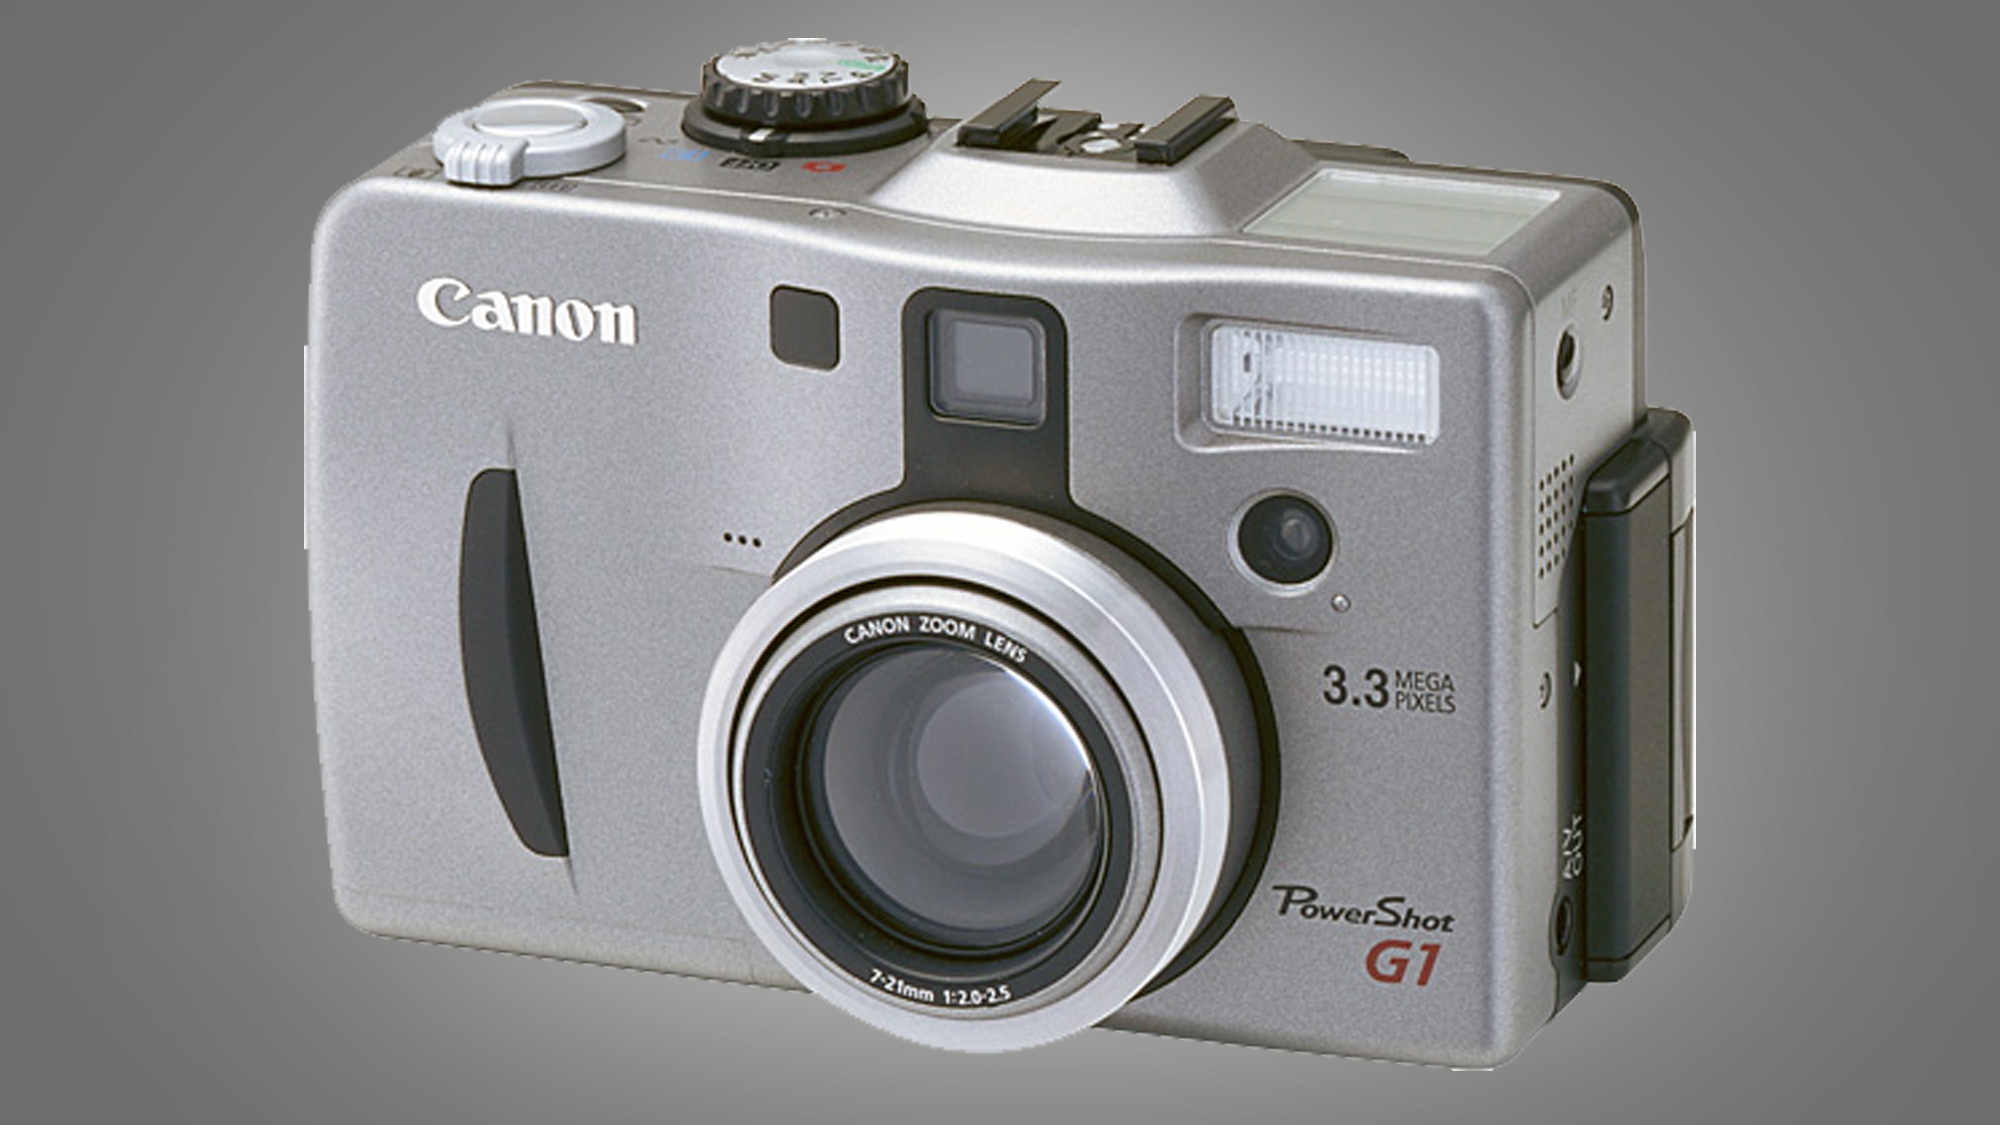 The Canon PowerShot G1 camera on a grey background